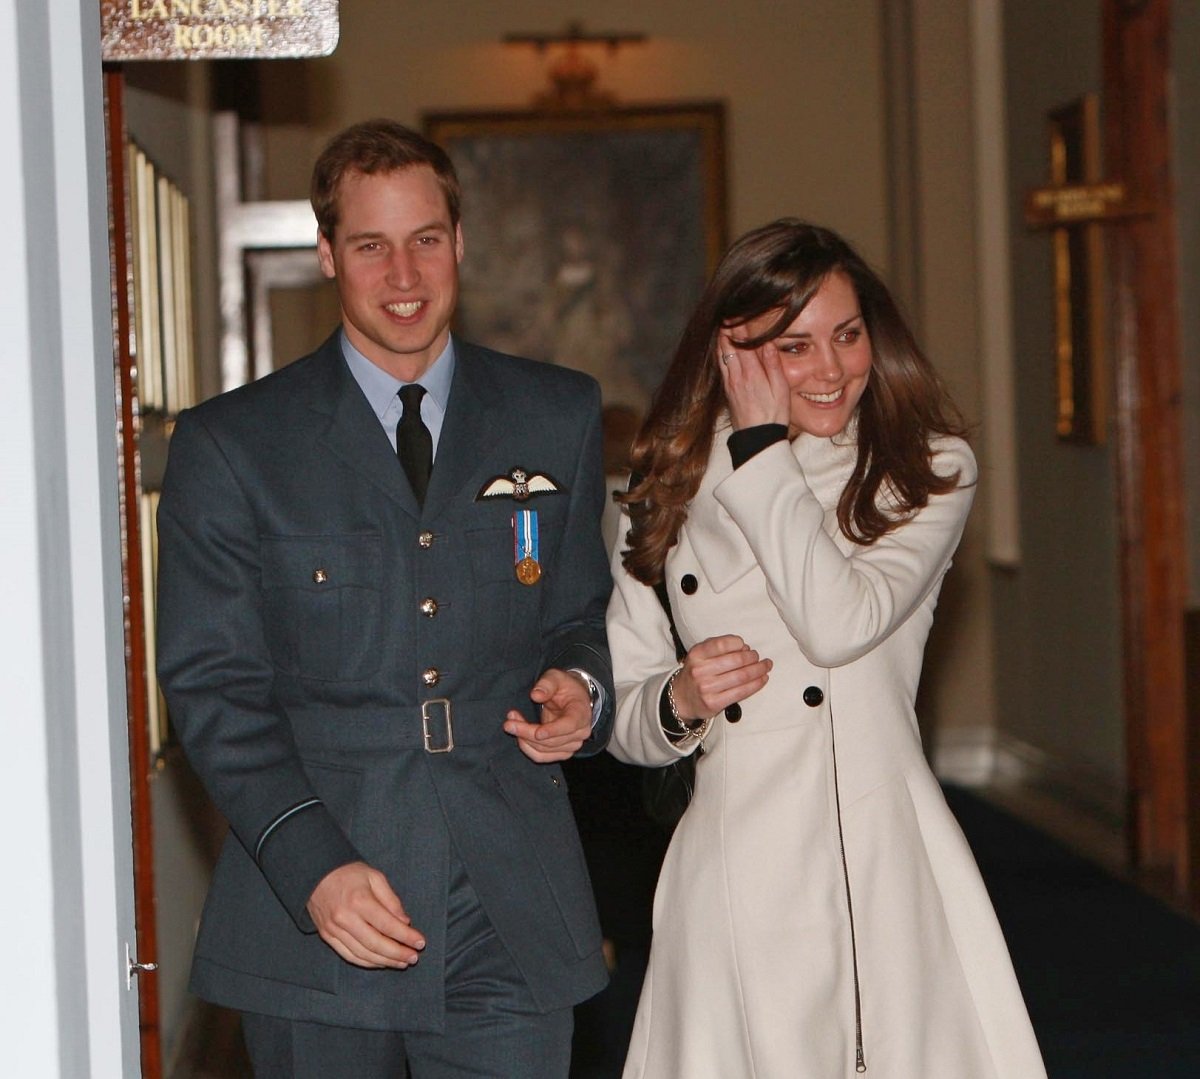 Prince William and Kate Middleton smiling after his graduation ceremony at RAF Cranwell air base